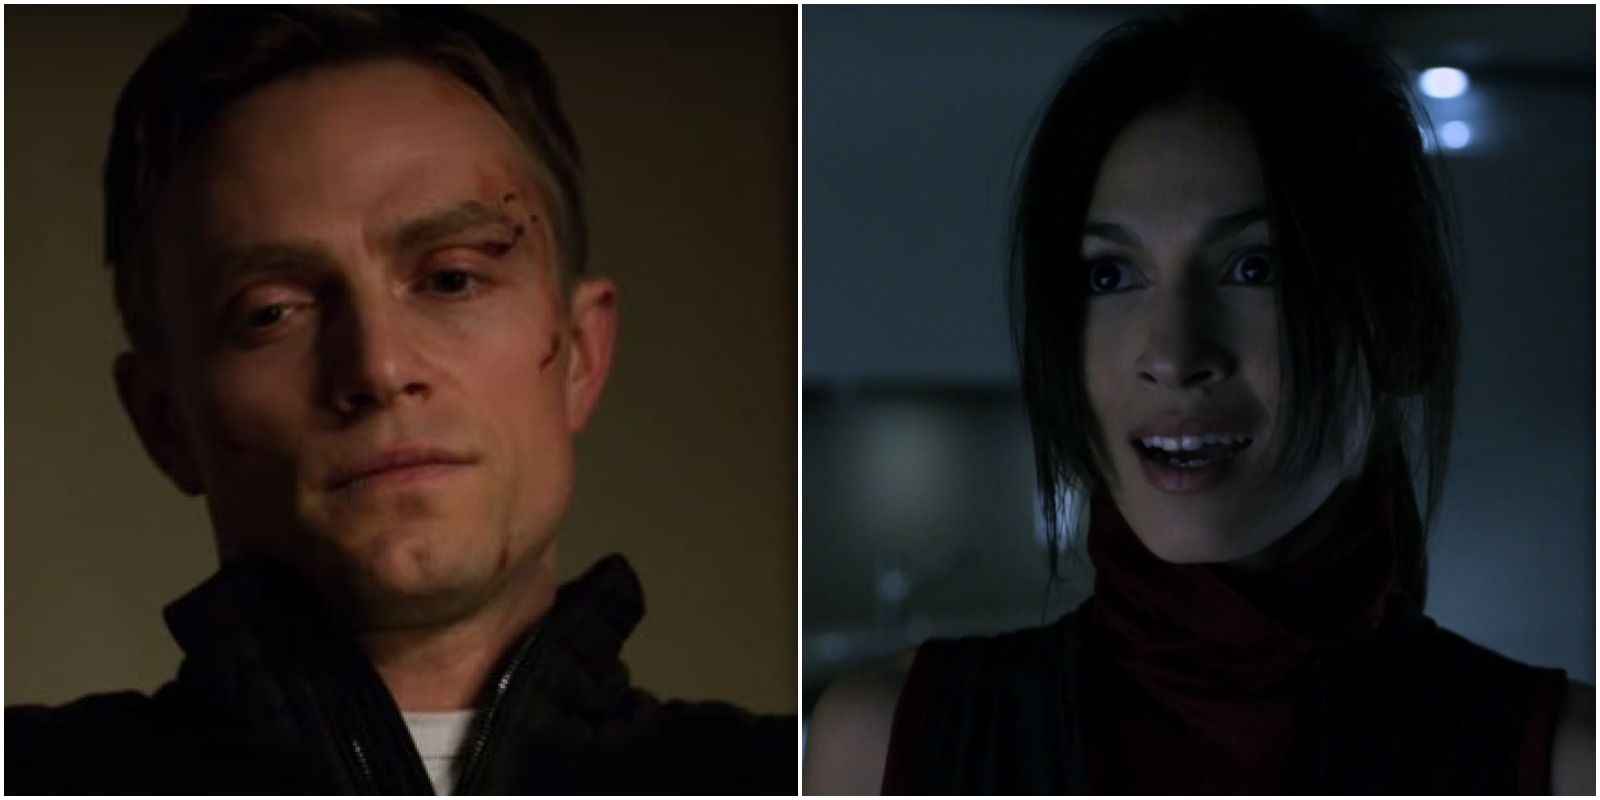 Ben Poindexter/Bullseye and Elektra in seasons three and two of Daredevil, respectively